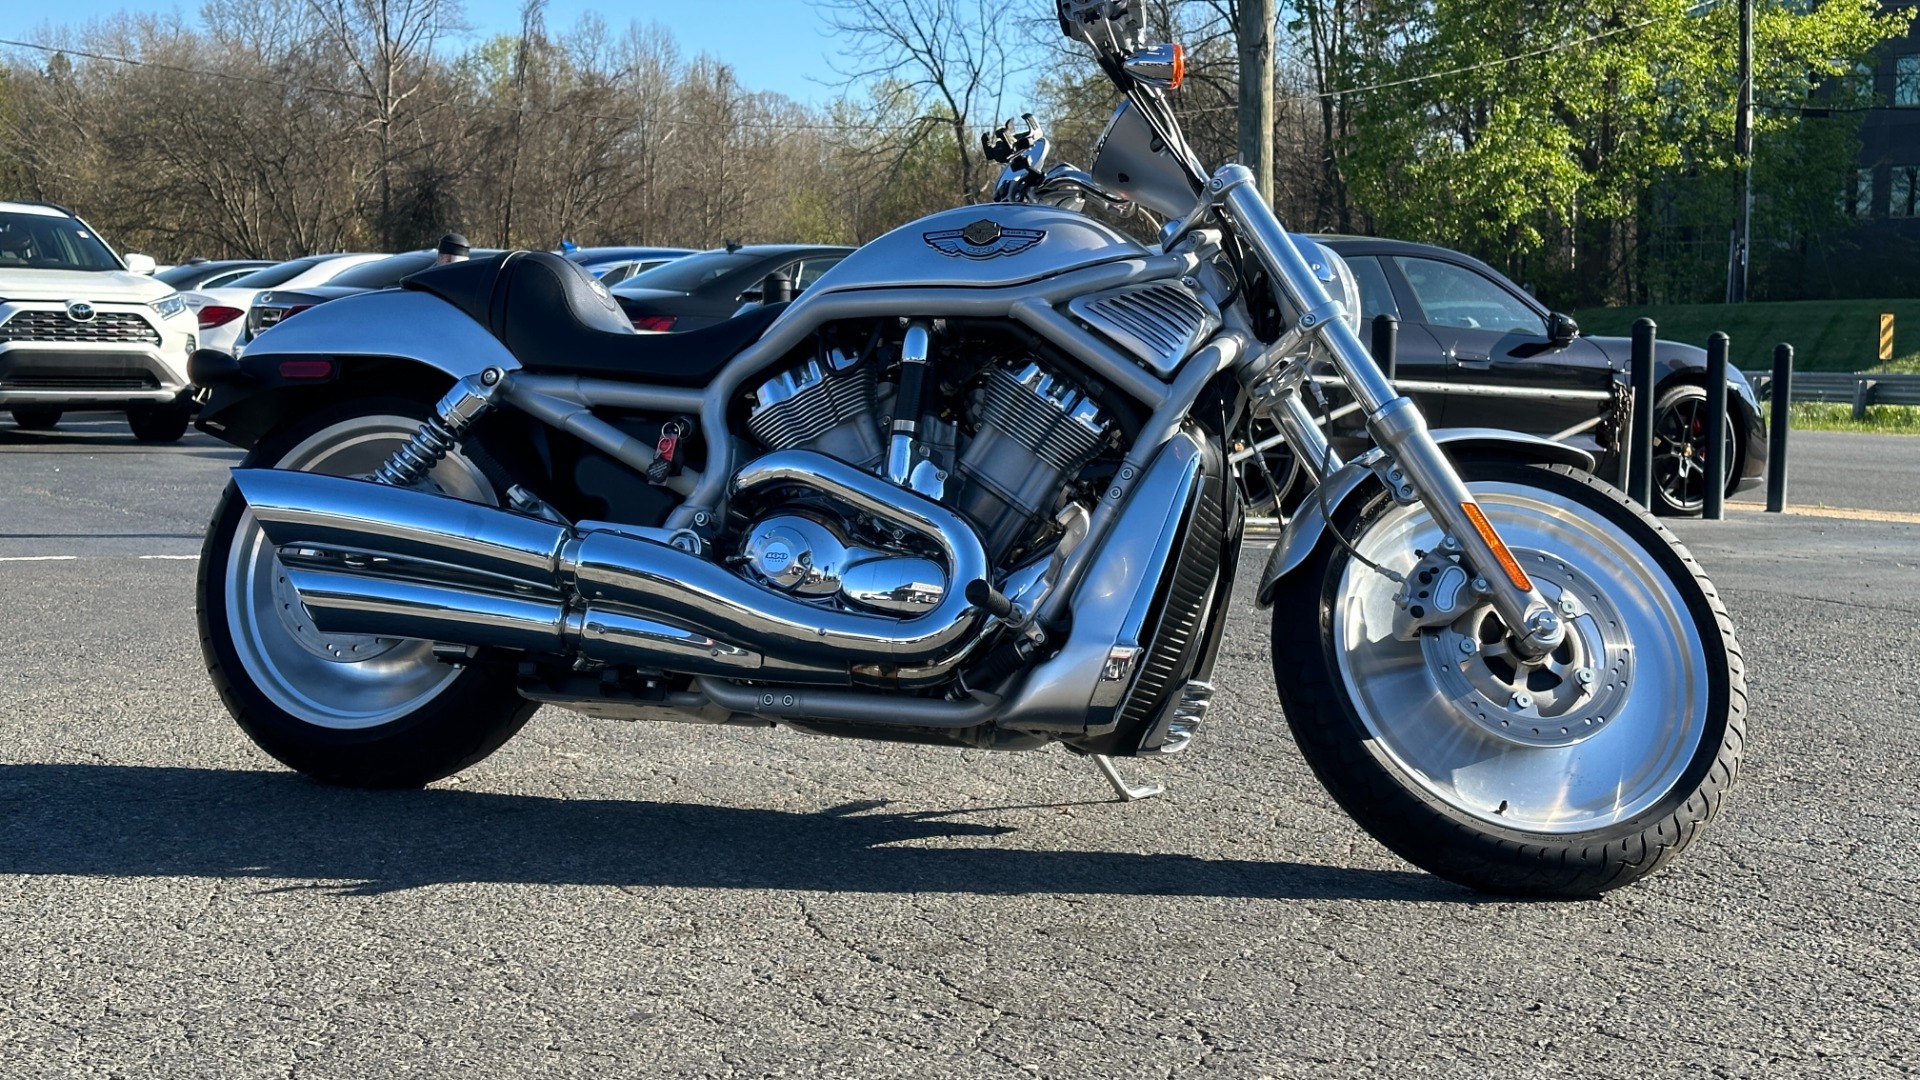 Used 2003 Harley Davidson V Rod ANNIVERSARY EDITION / 1130CC ENGINE / BREMBO BRAKES / VORTEX AIR SCOOPS for sale $9,995 at Formula Imports in Charlotte NC 28227 54